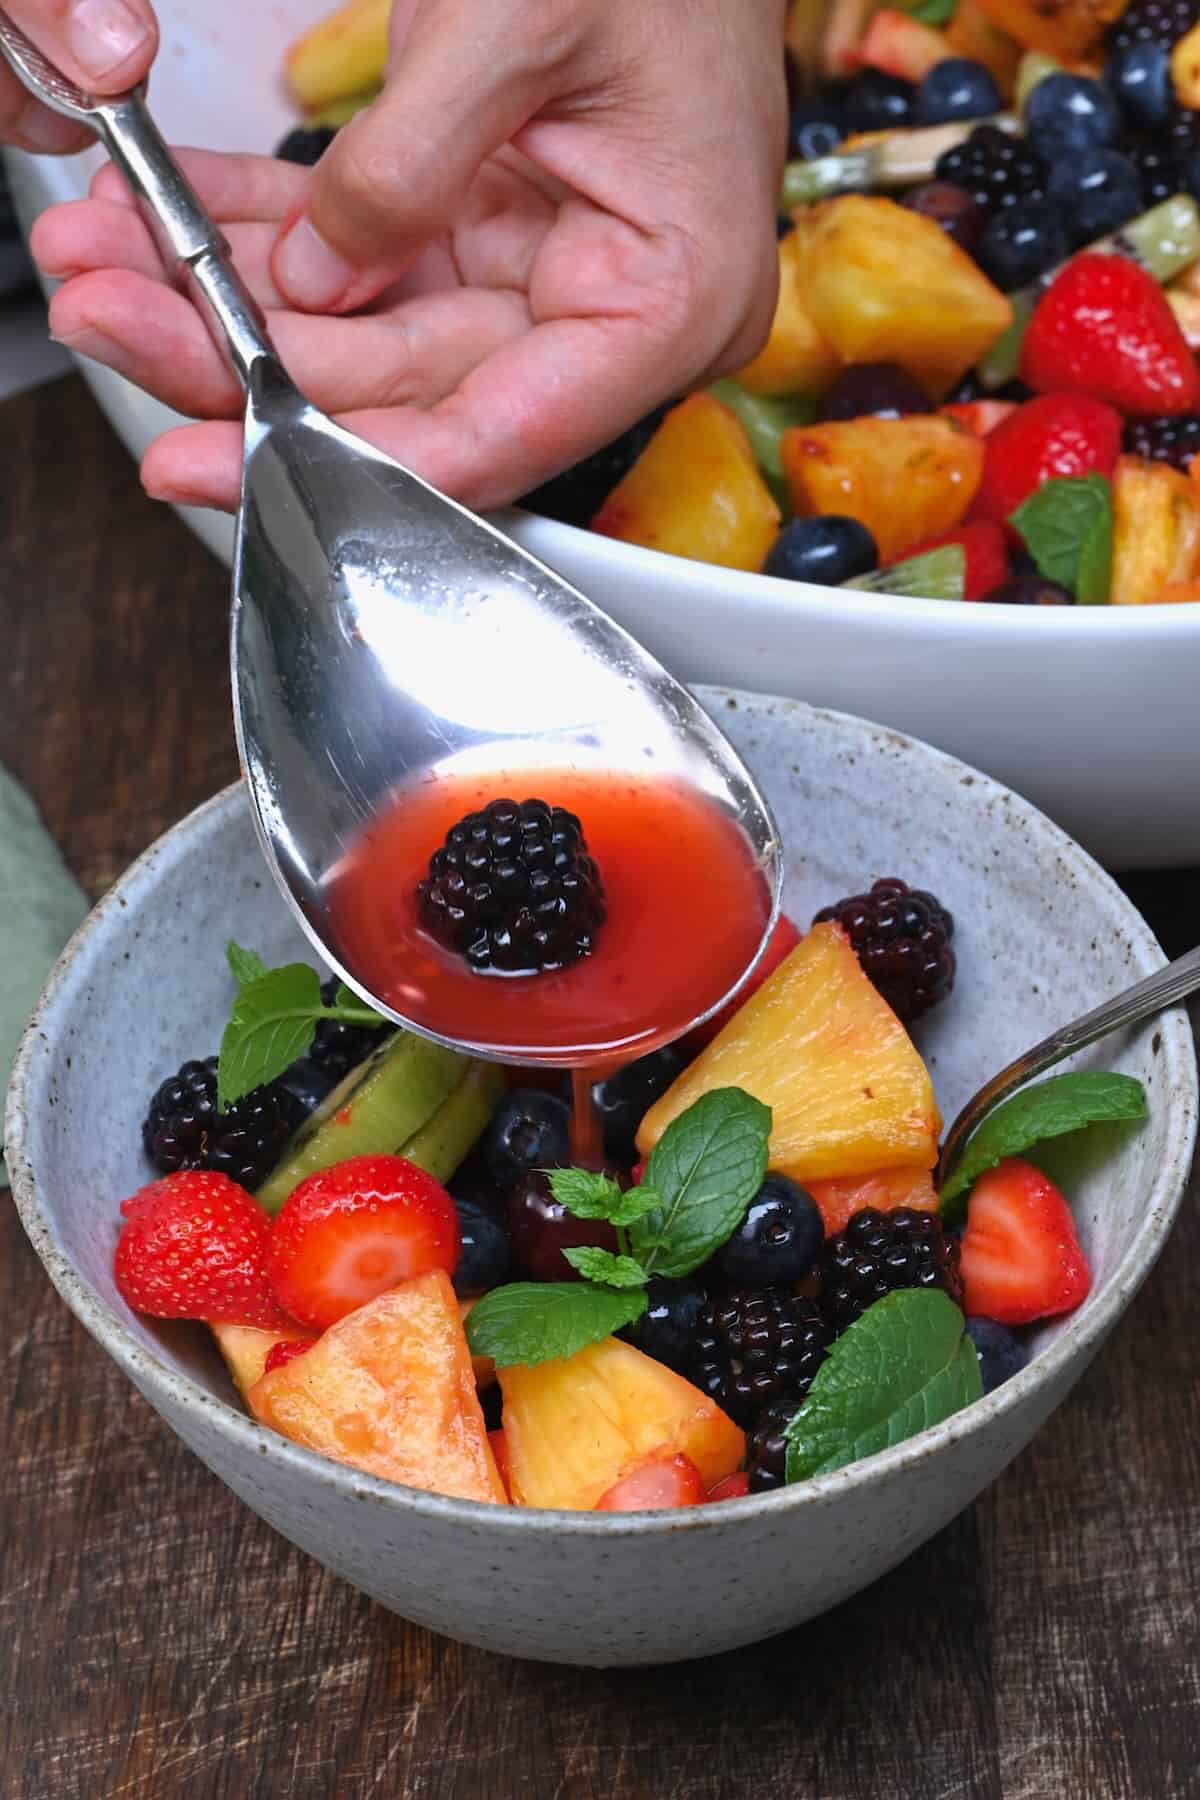 Adding some dressing over fruit salad in a bowl